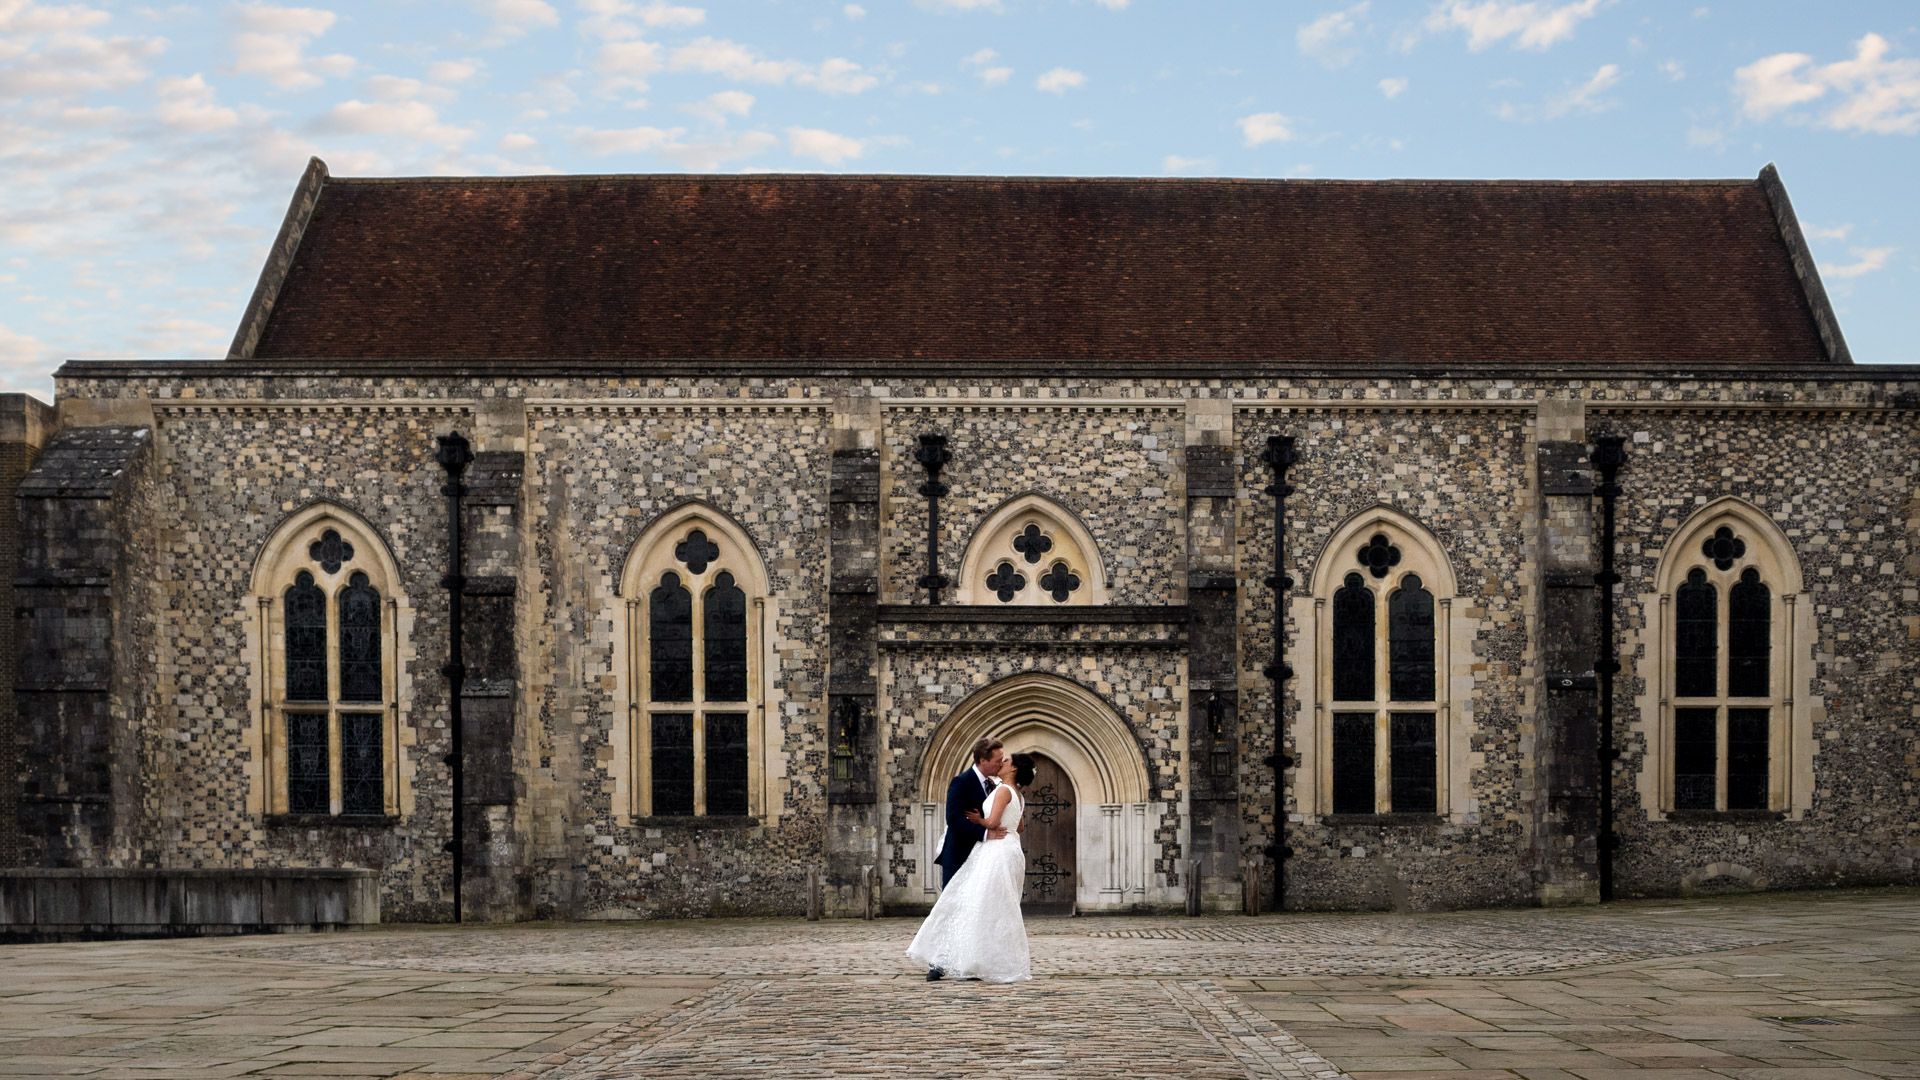 Groom kisses bride outside Winchester Great Hall beneath bue sky at sunset